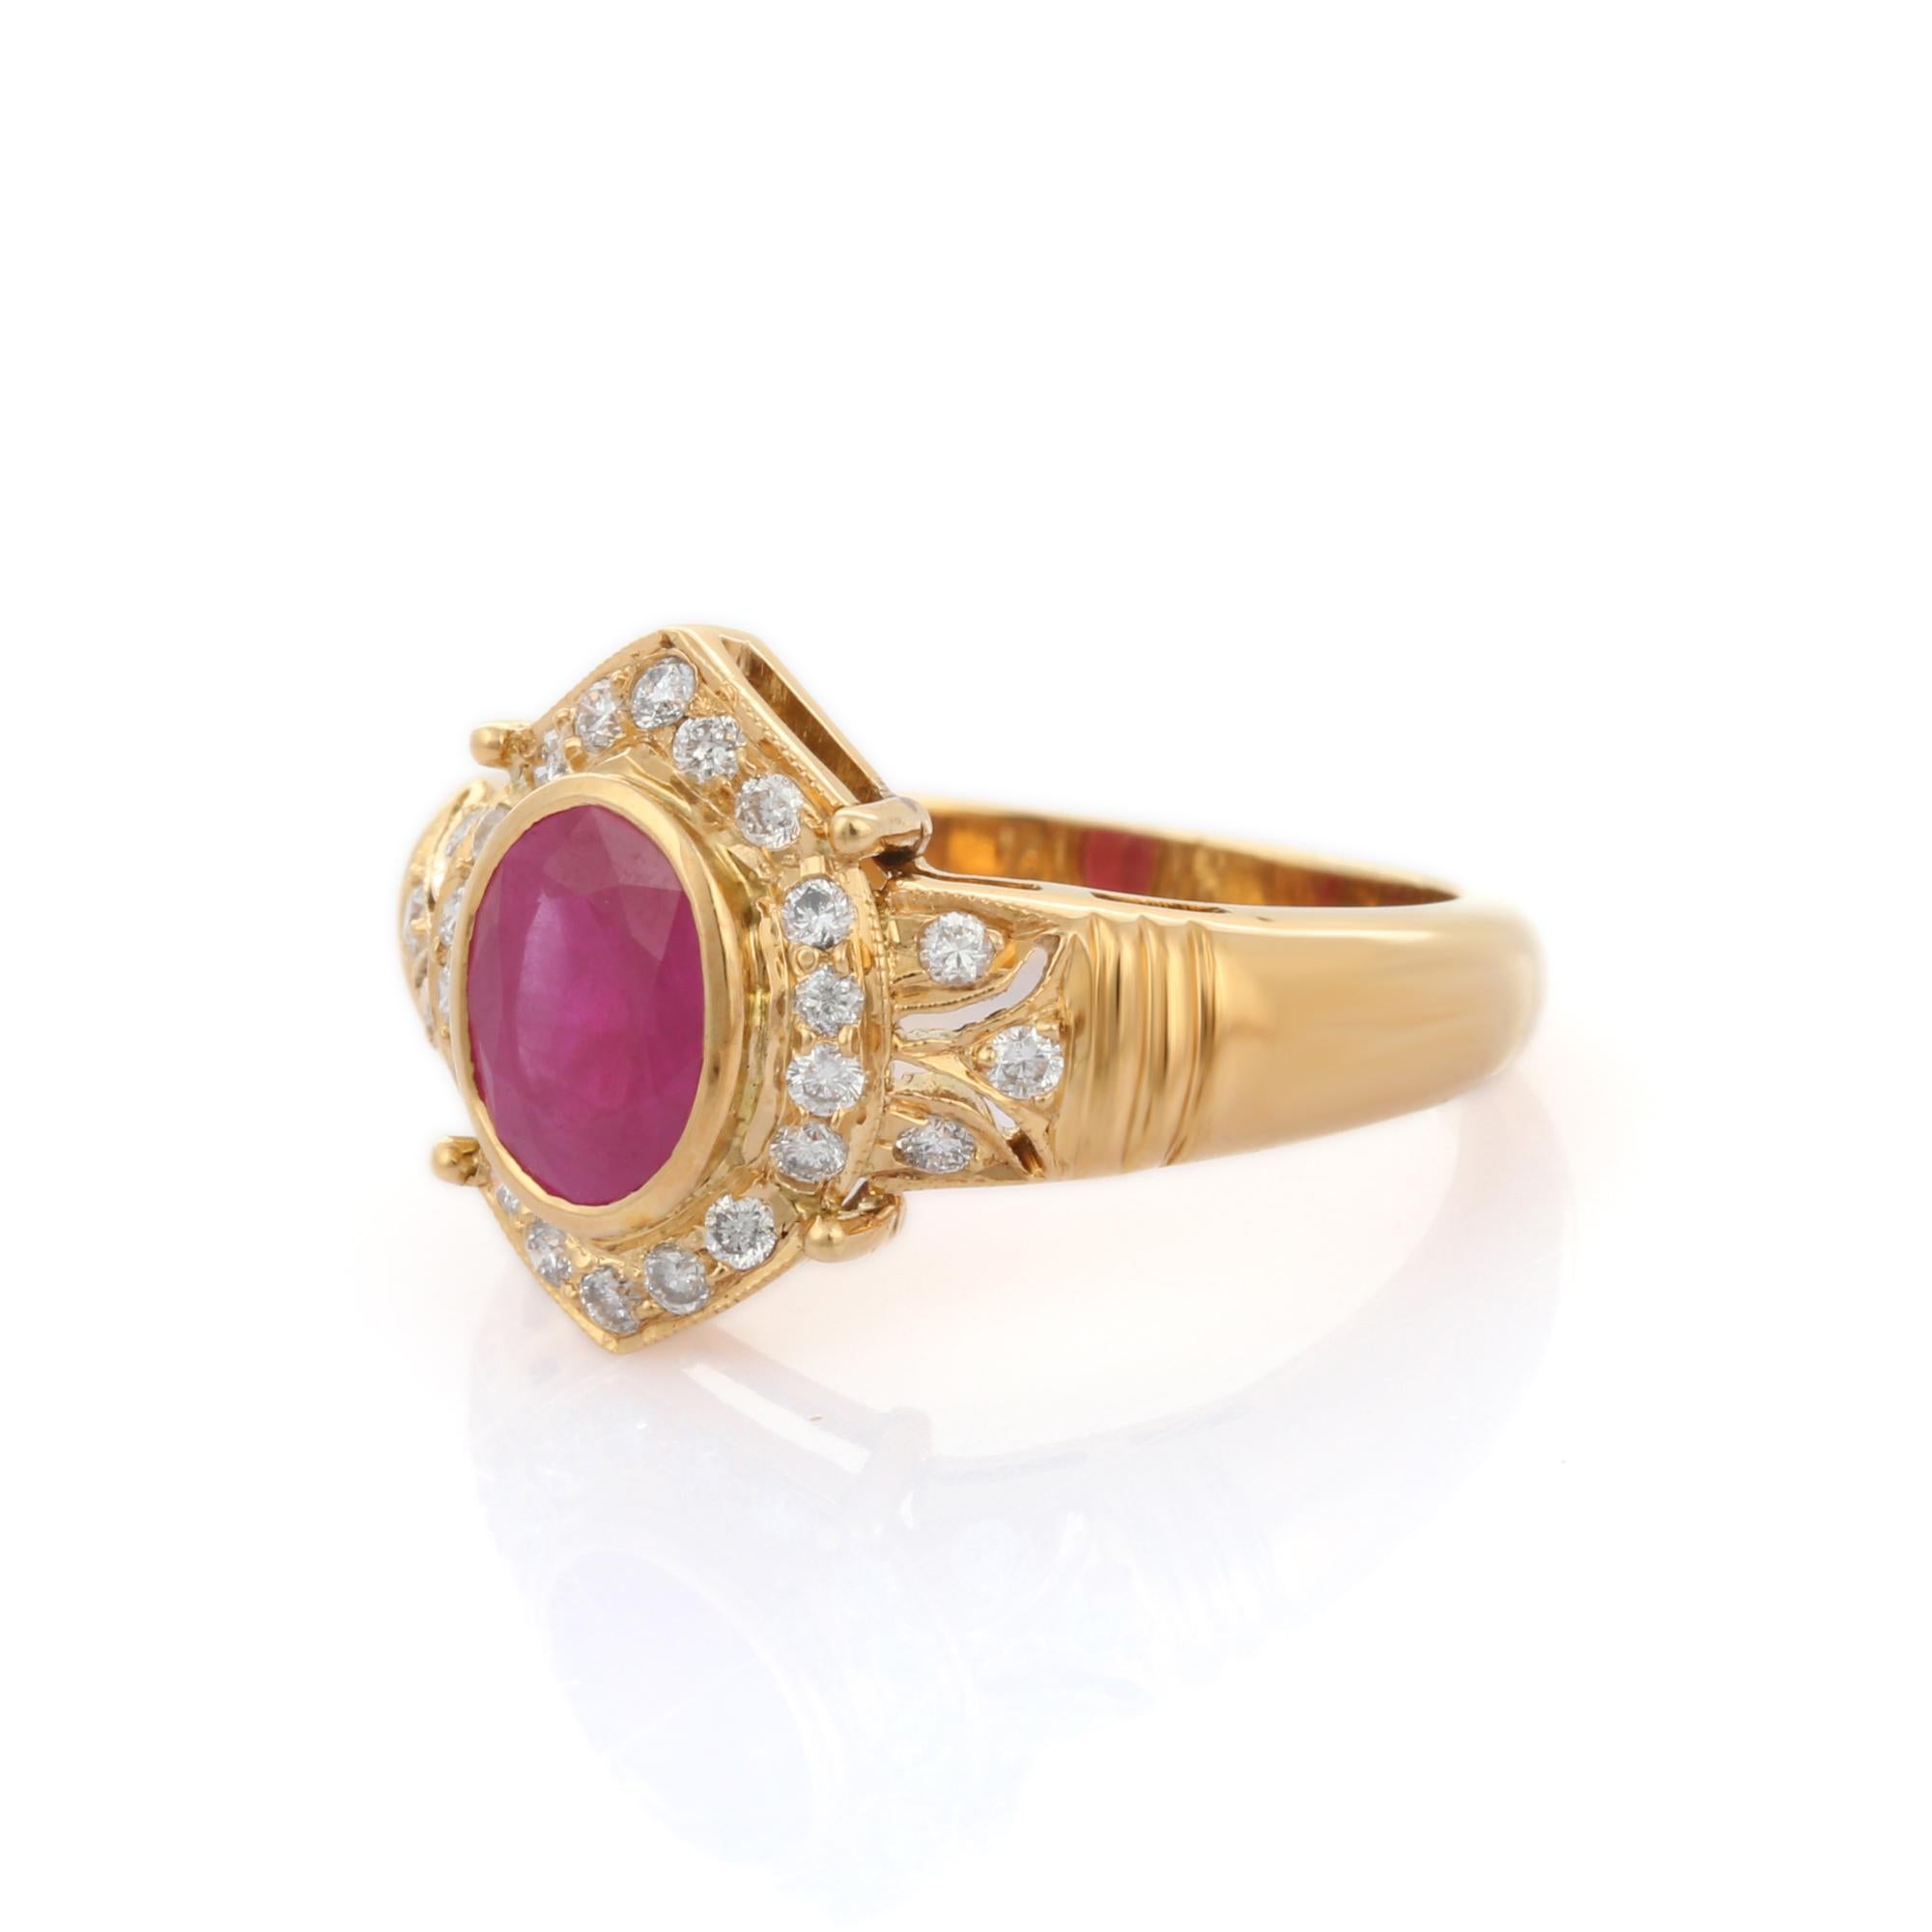 For Sale:  Contemporary Style Diamond Ruby Ring in 18K Yellow Gold 8